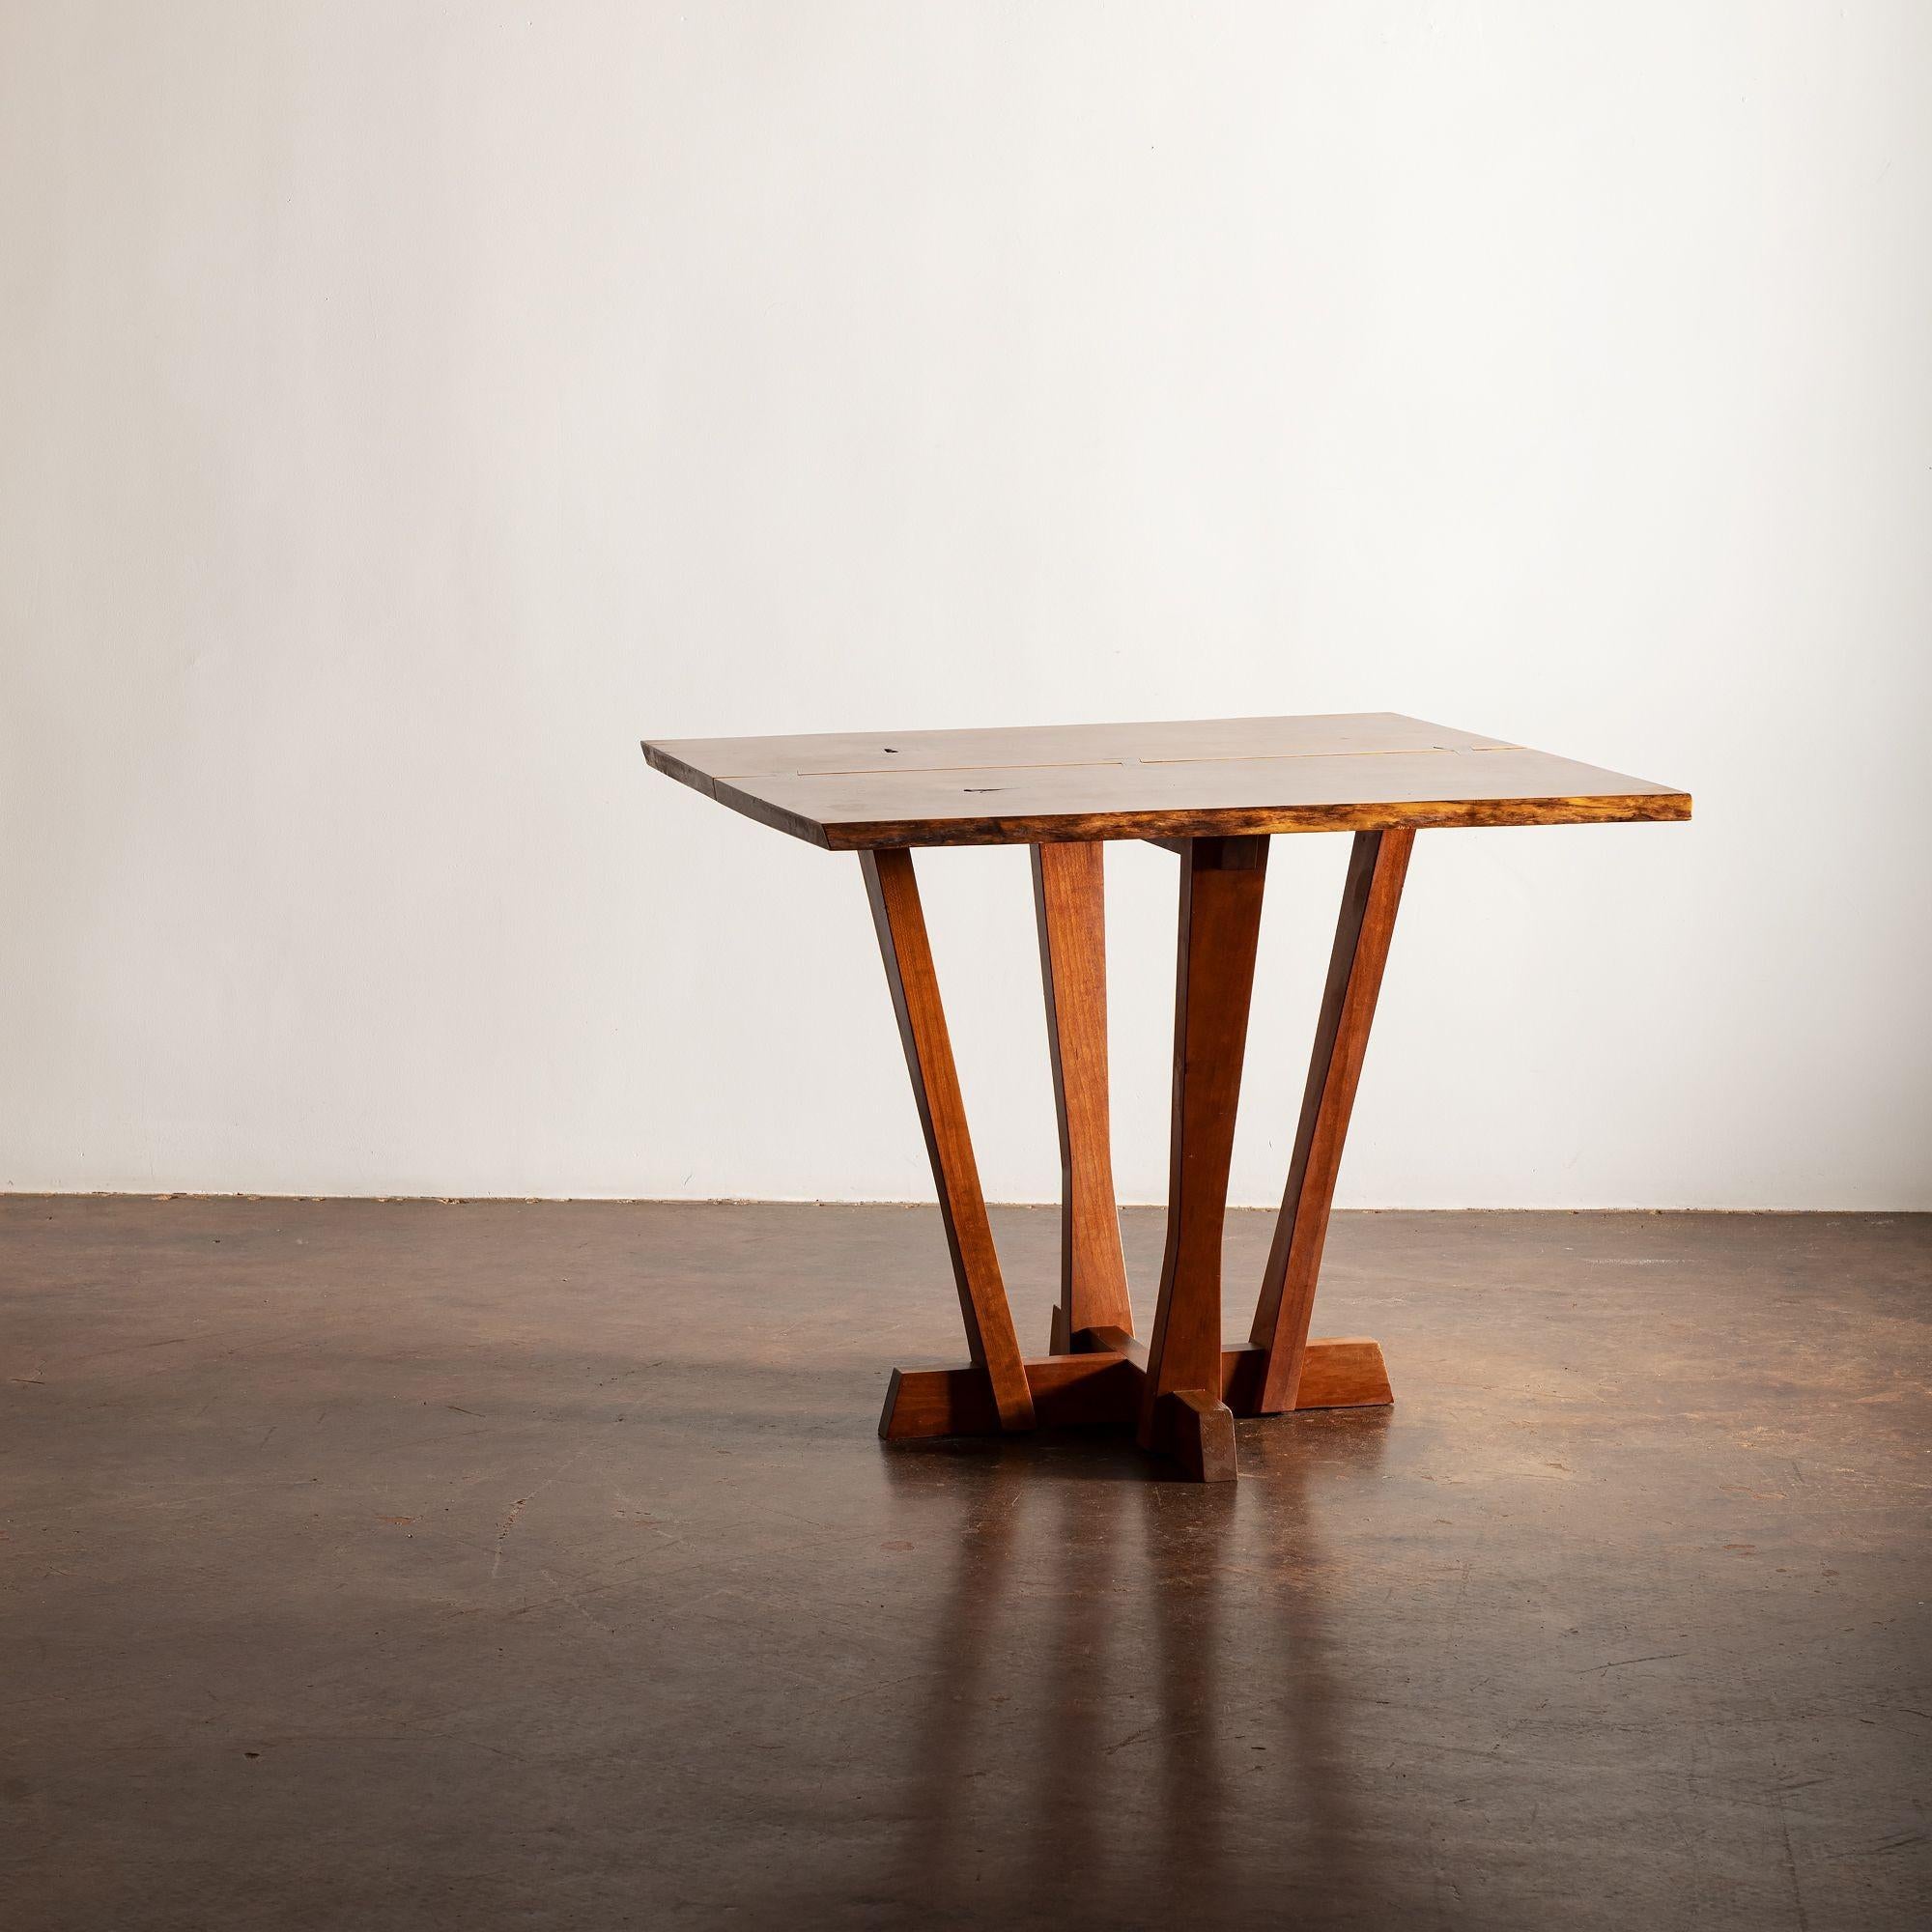 American Mira Nakashima Special Bryfogel Table in Cherry and Laurel, 2008